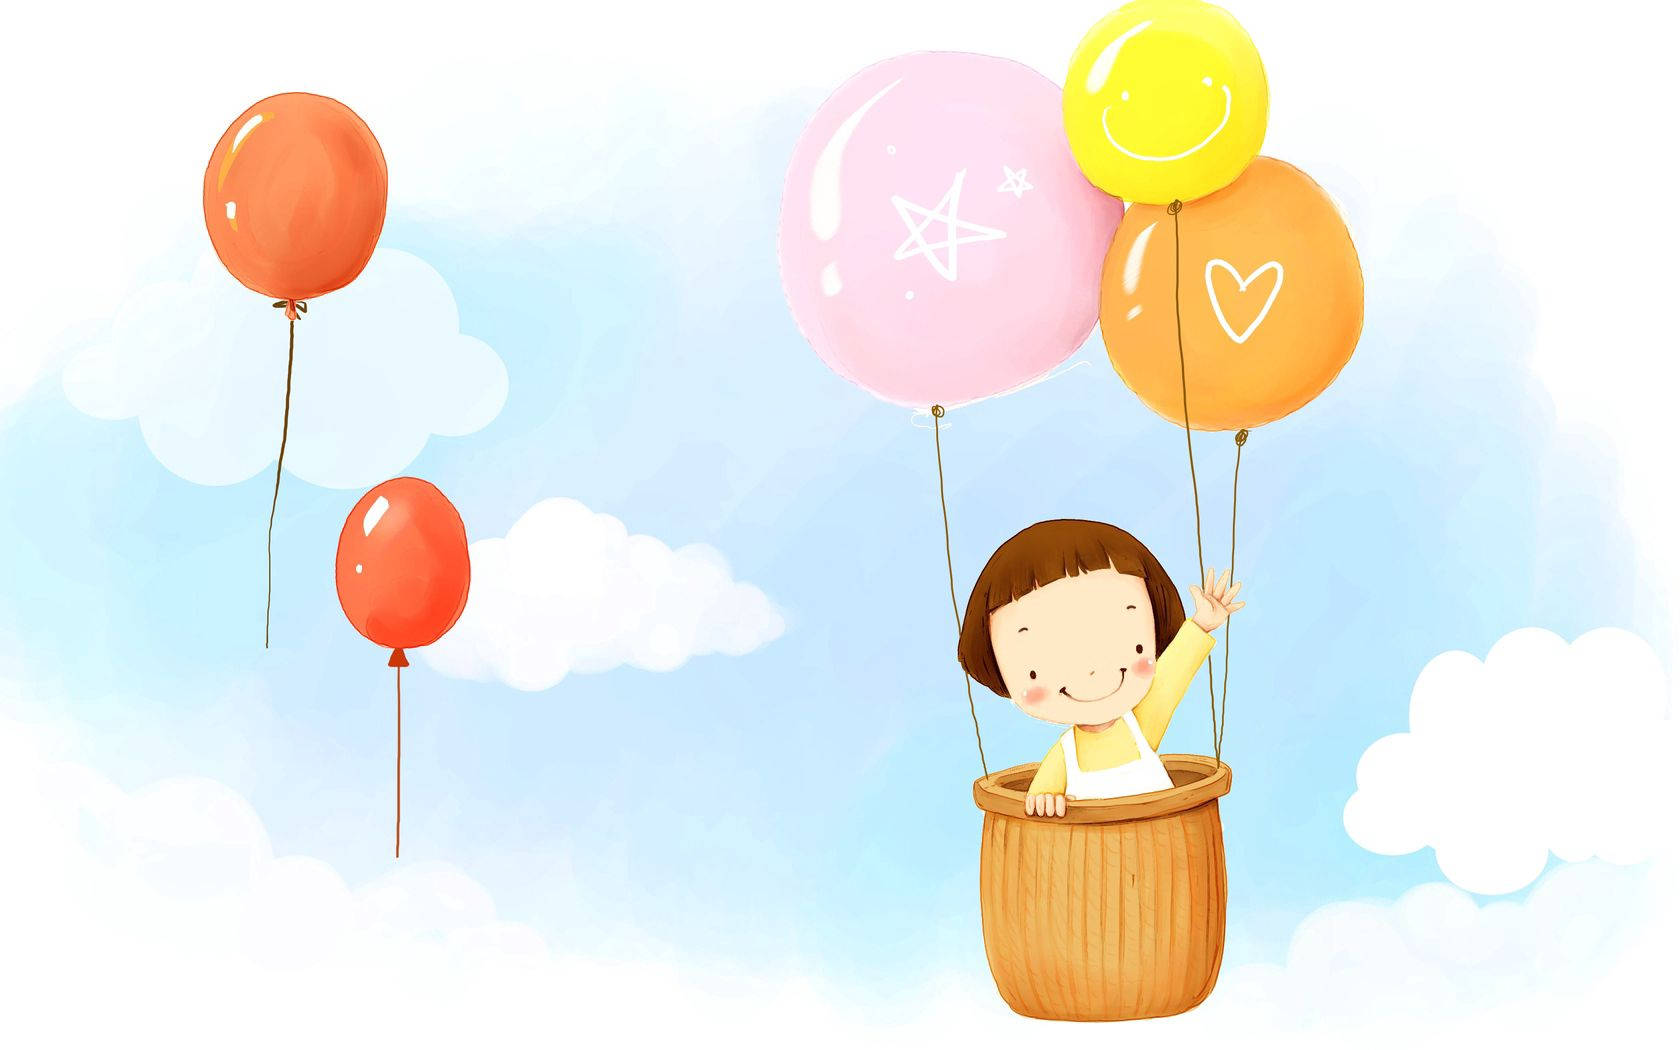 An Adorable Baby Looks With Wonder At The Colorful Balloons In The Sky